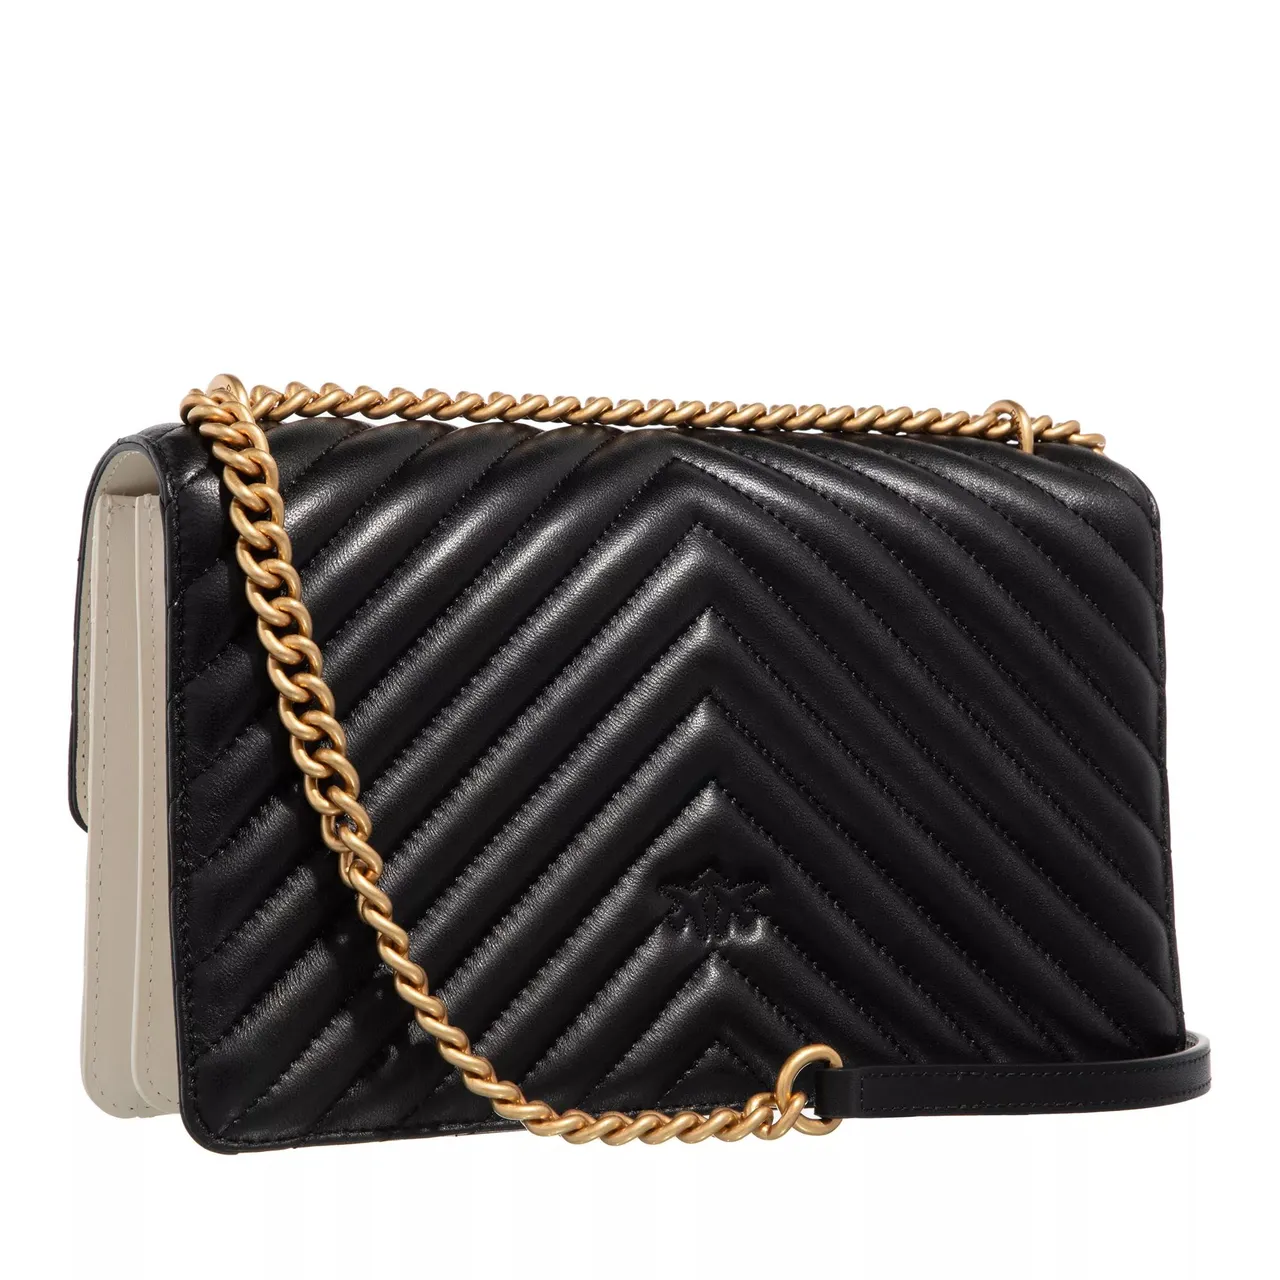 Pinko Crossbody Bags - Love One Classic Cl - black - Crossbody Bags for ladies